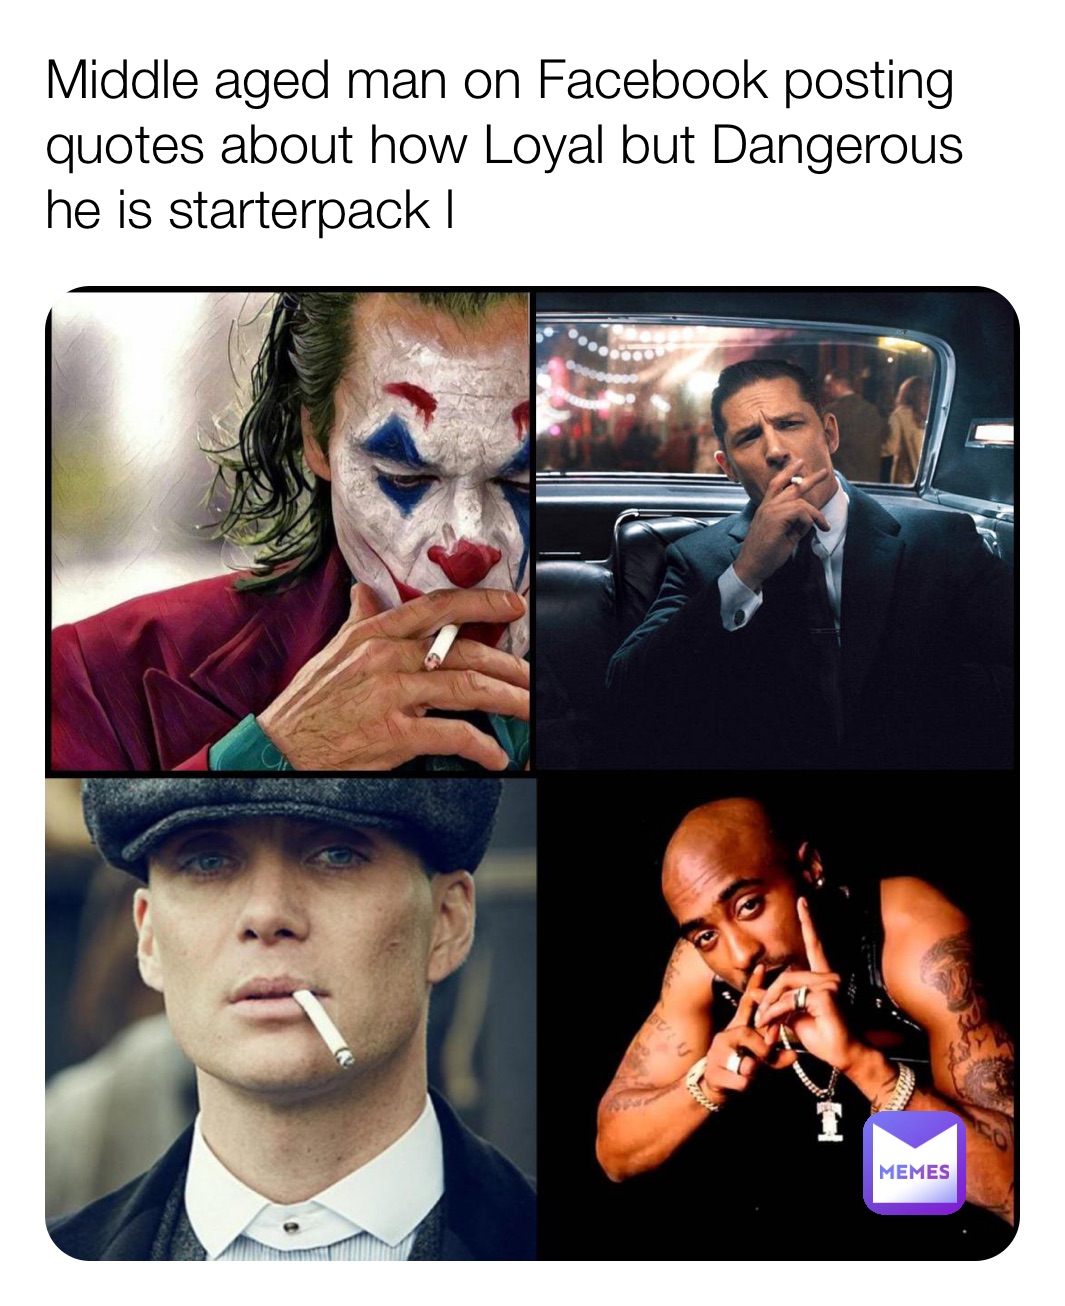 Middle aged man on Facebook posting quotes about how Loyal but Dangerous he is starterpack l